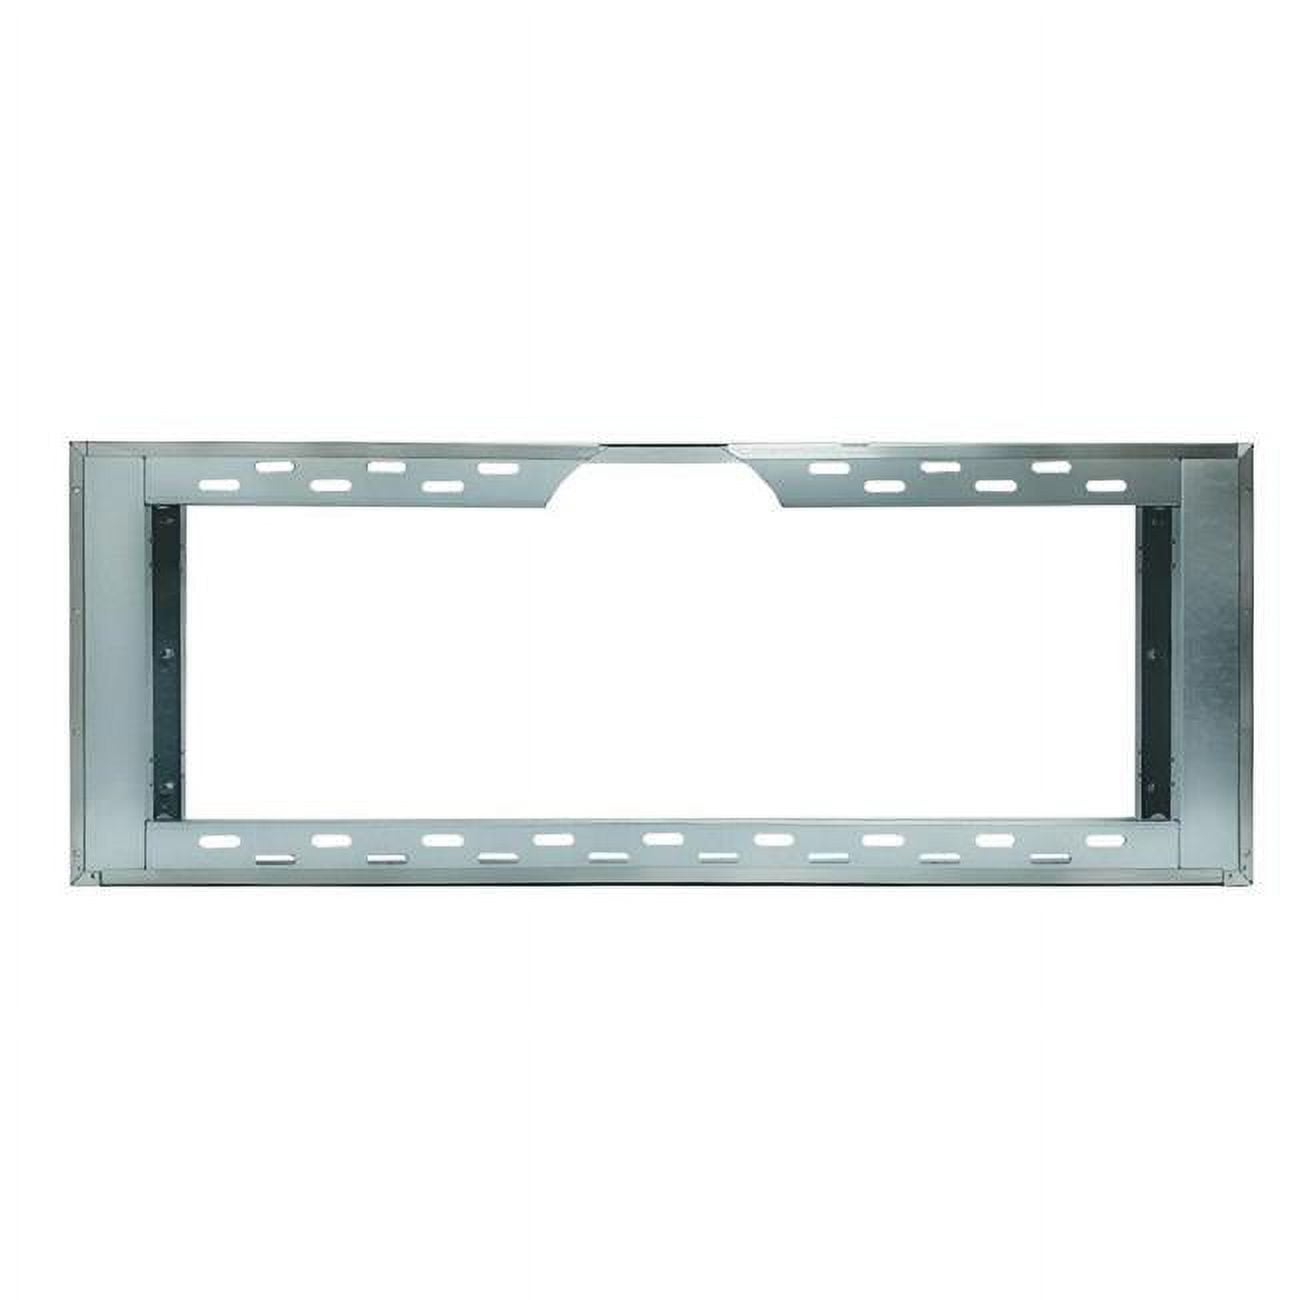 Picture of Mr Heater RVH36-SP8 36 x 8 in. Vent Hood Spacer